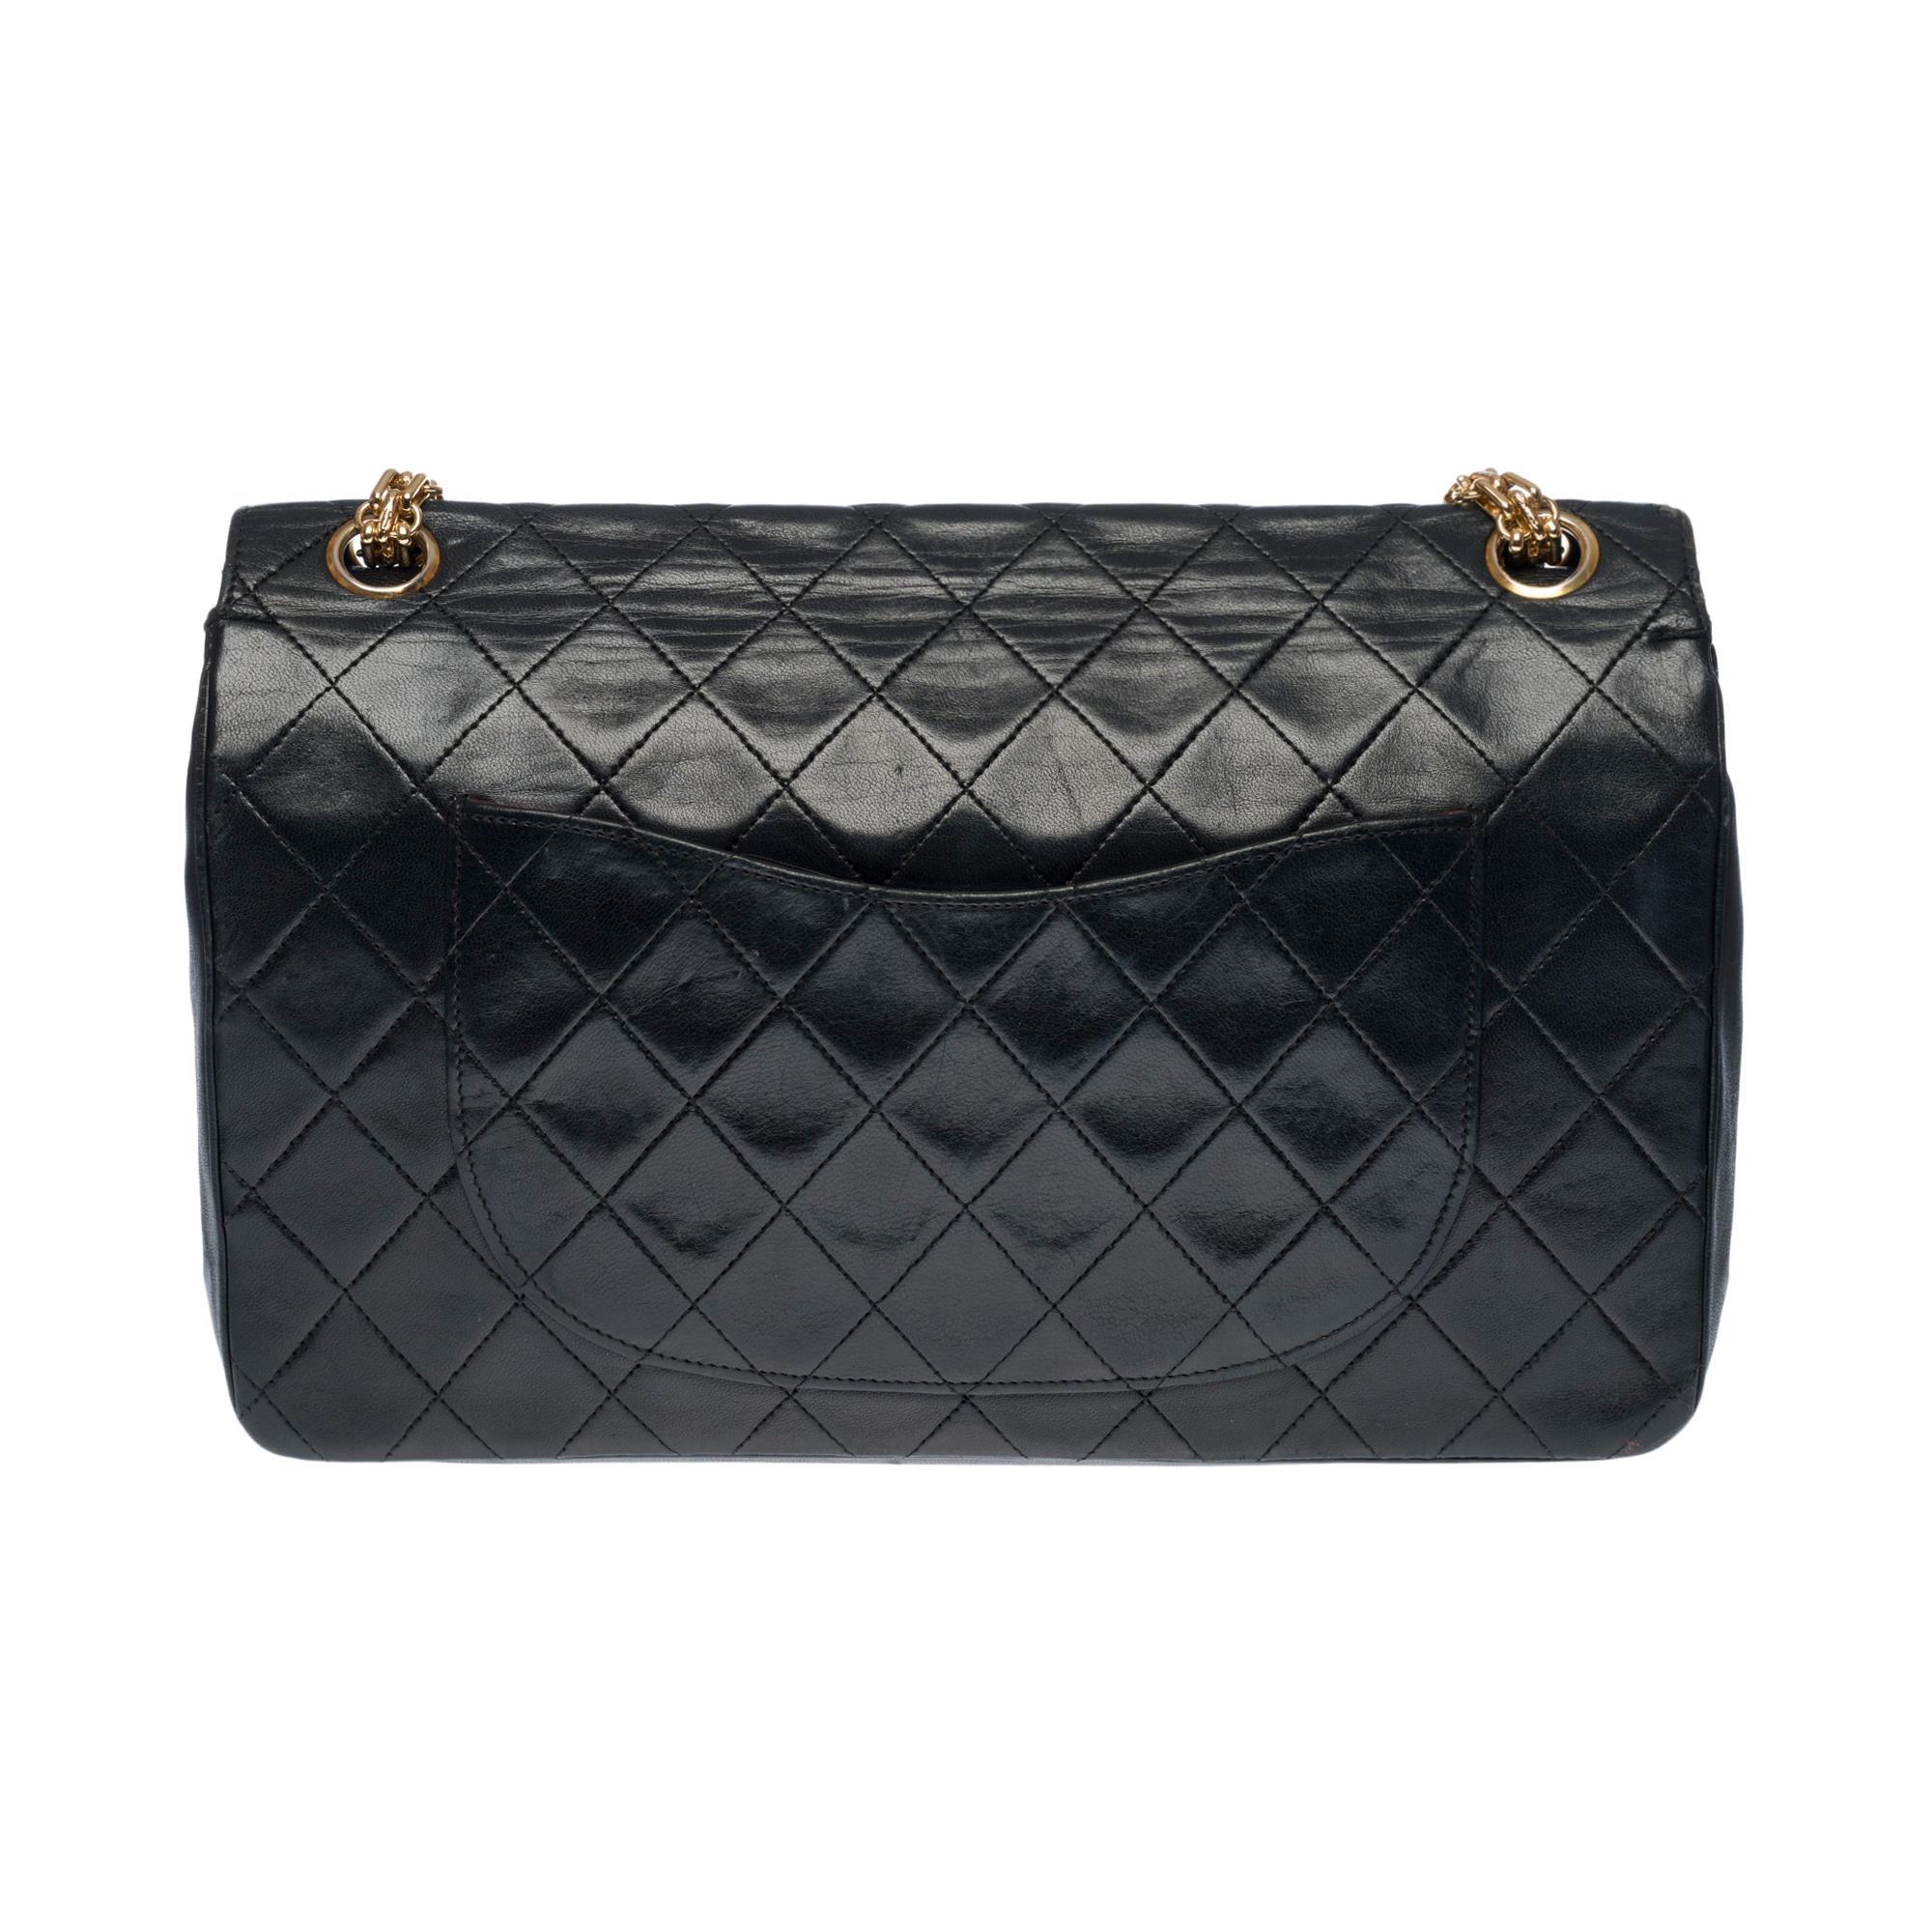 Beautiful Chanel Timeless/Classic double flap shoulder bag in black quilted lambskin leather, gold-plated metal hardware, a Mademoiselle gold-plated metal chain handle for a hand or shoulder support

A patch pocket on the back of the bag
Inner